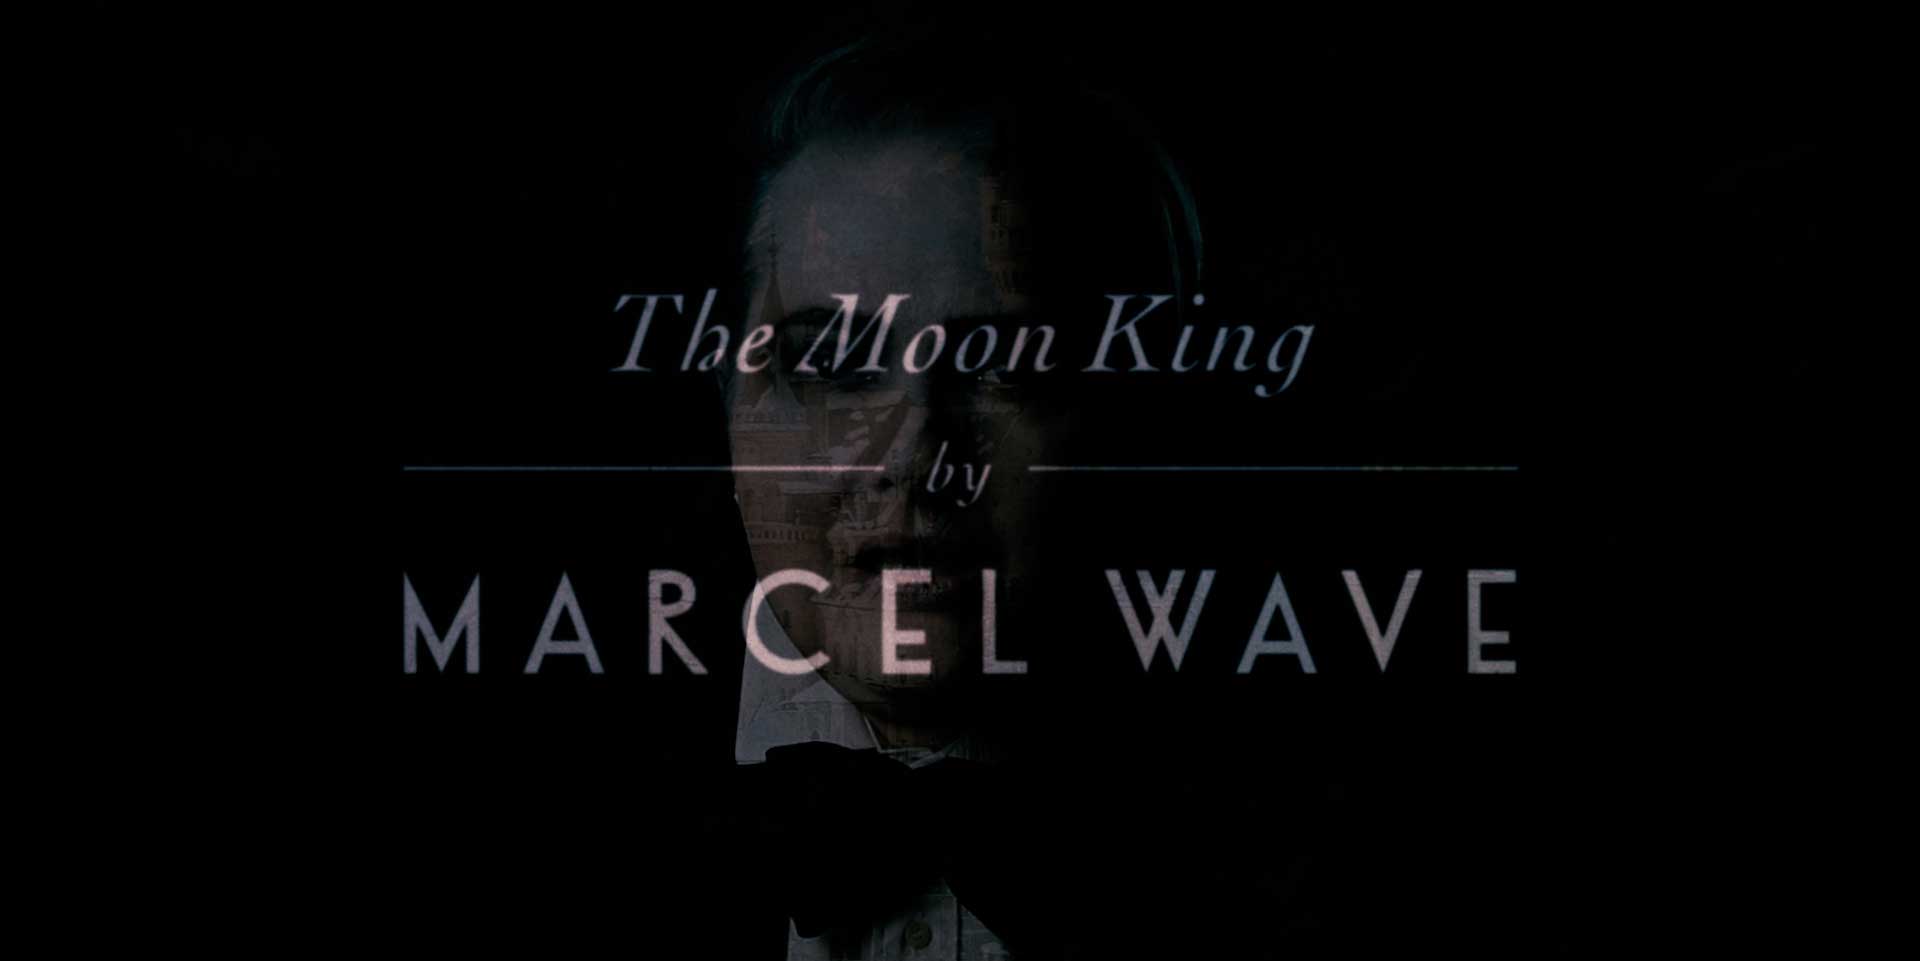 Marcel Wave “The Moon King” Video